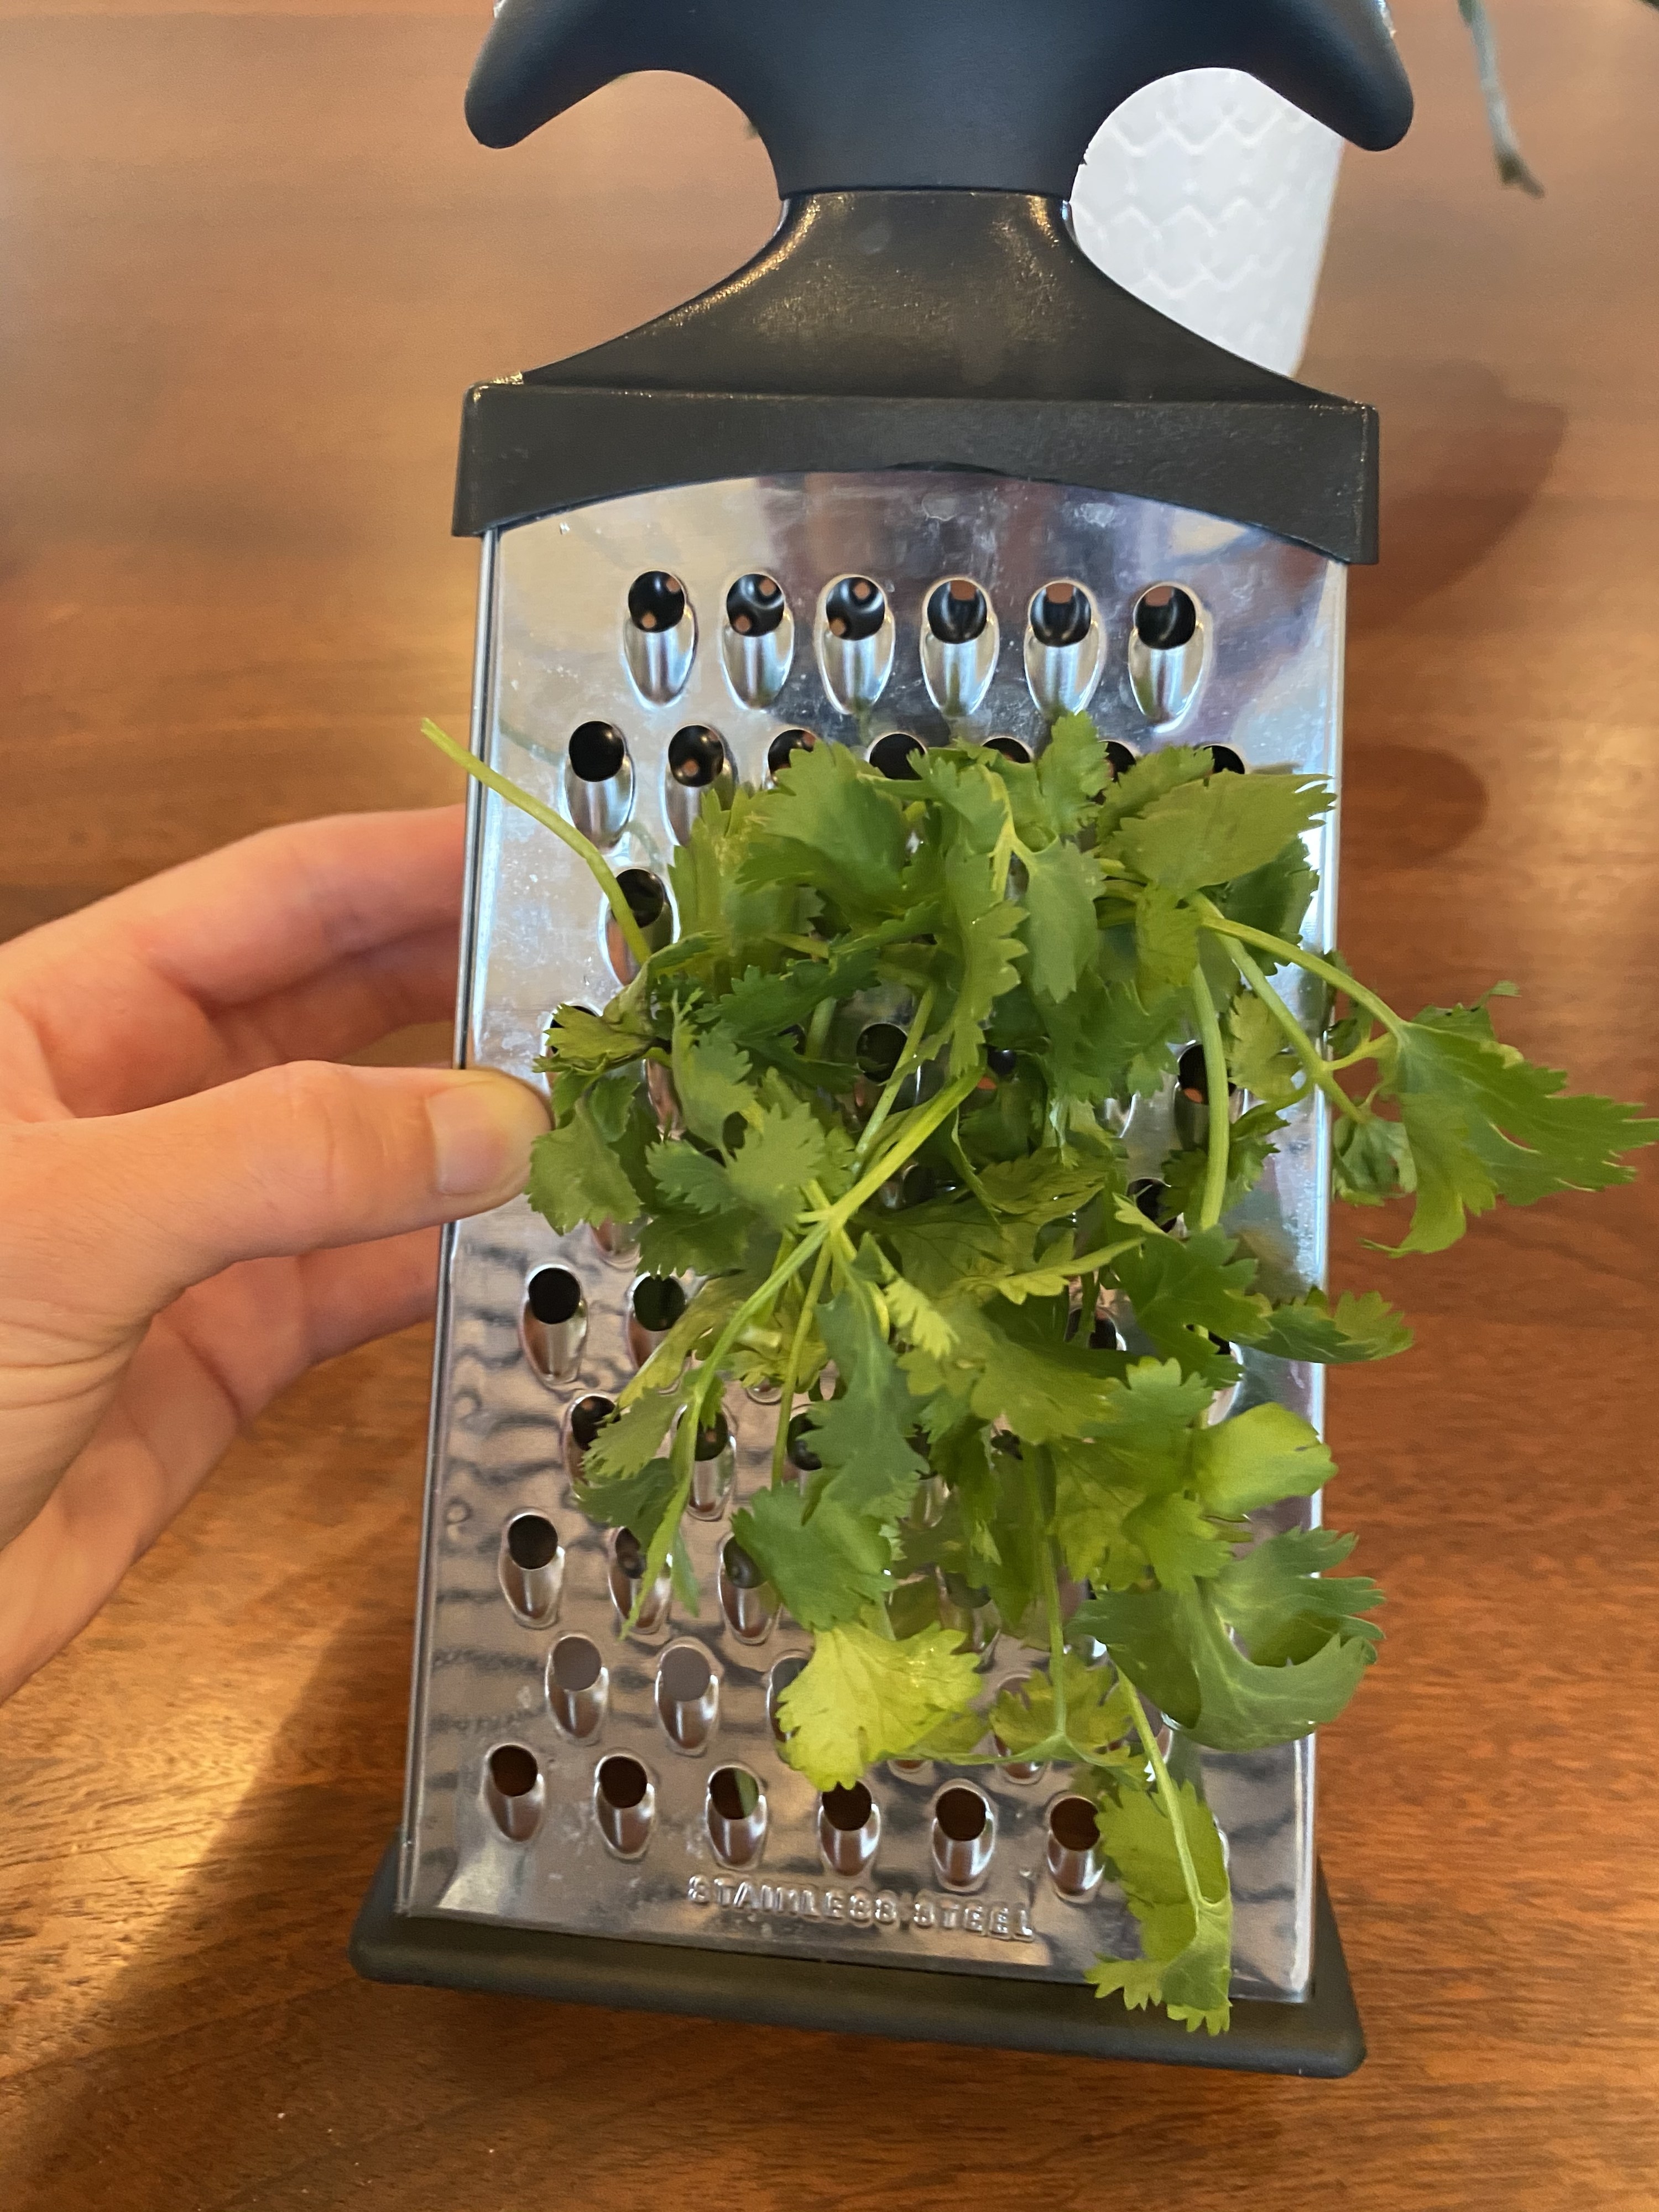 A handful of cilantro with its stems thread through a box grater.